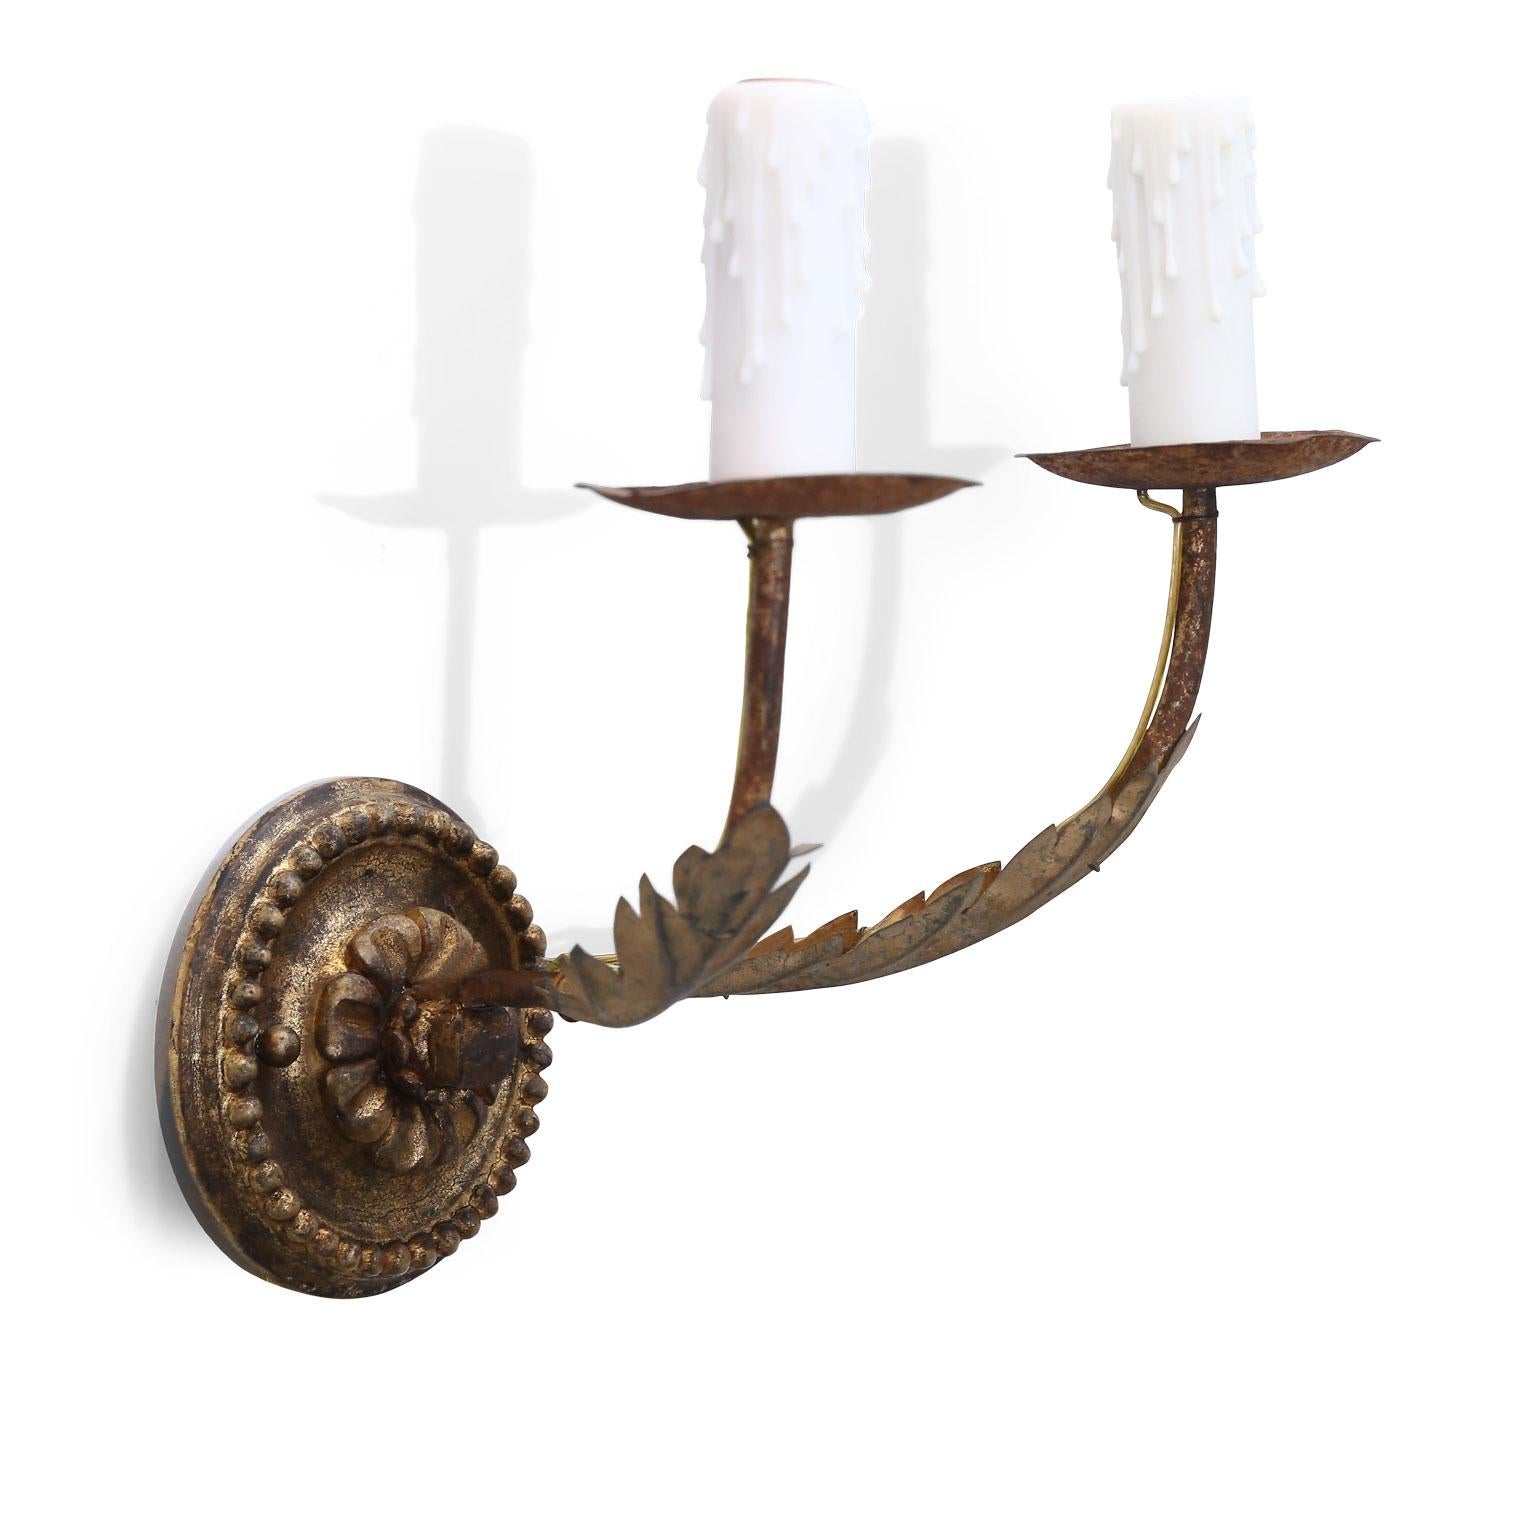 French Provincial Pair of Petite Gilt-Tole French Sconces